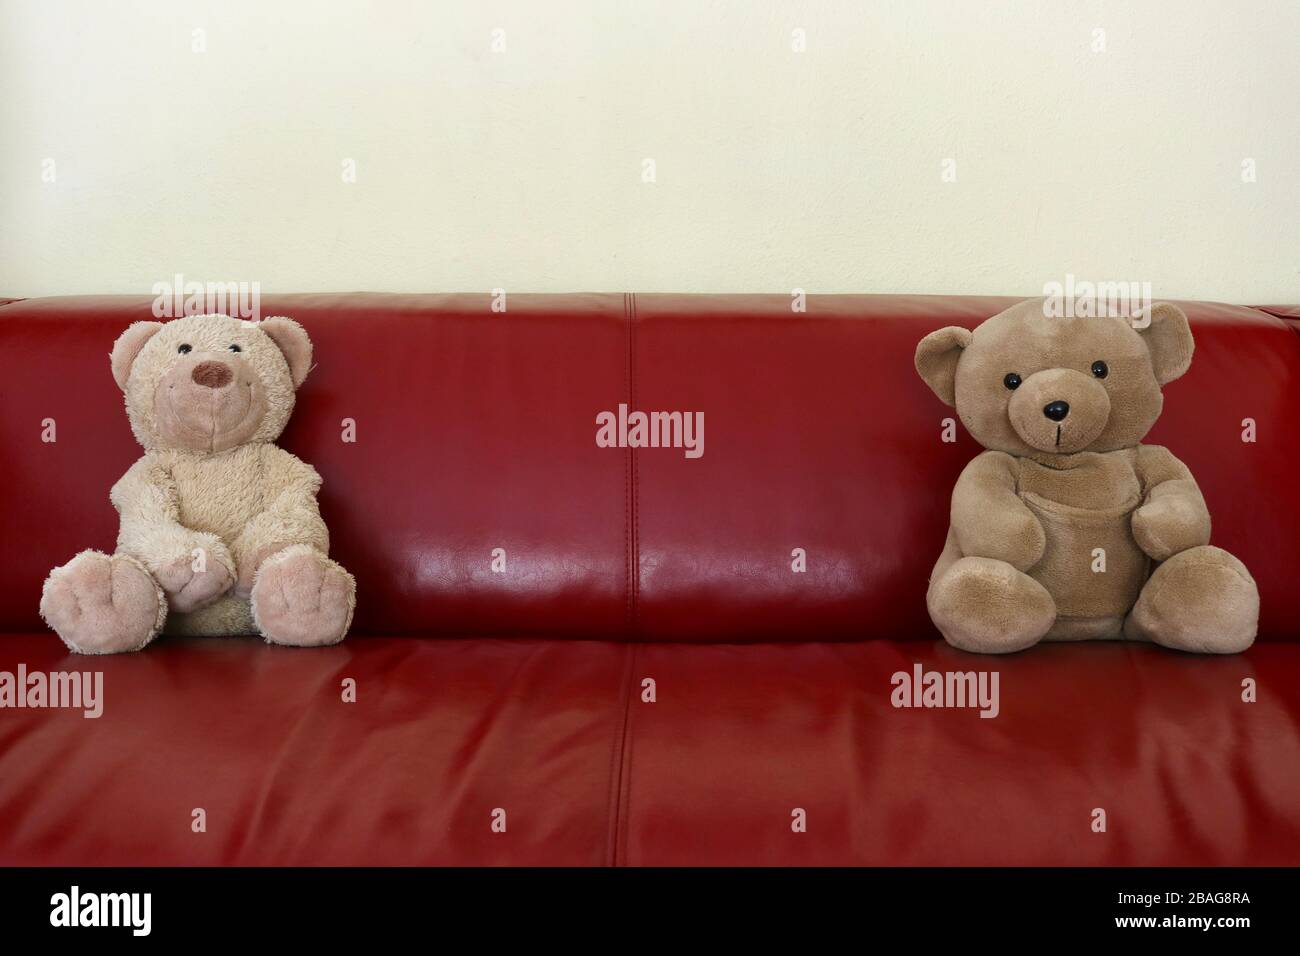 Two teddy bears on a couch that are social distancing Stock Photo